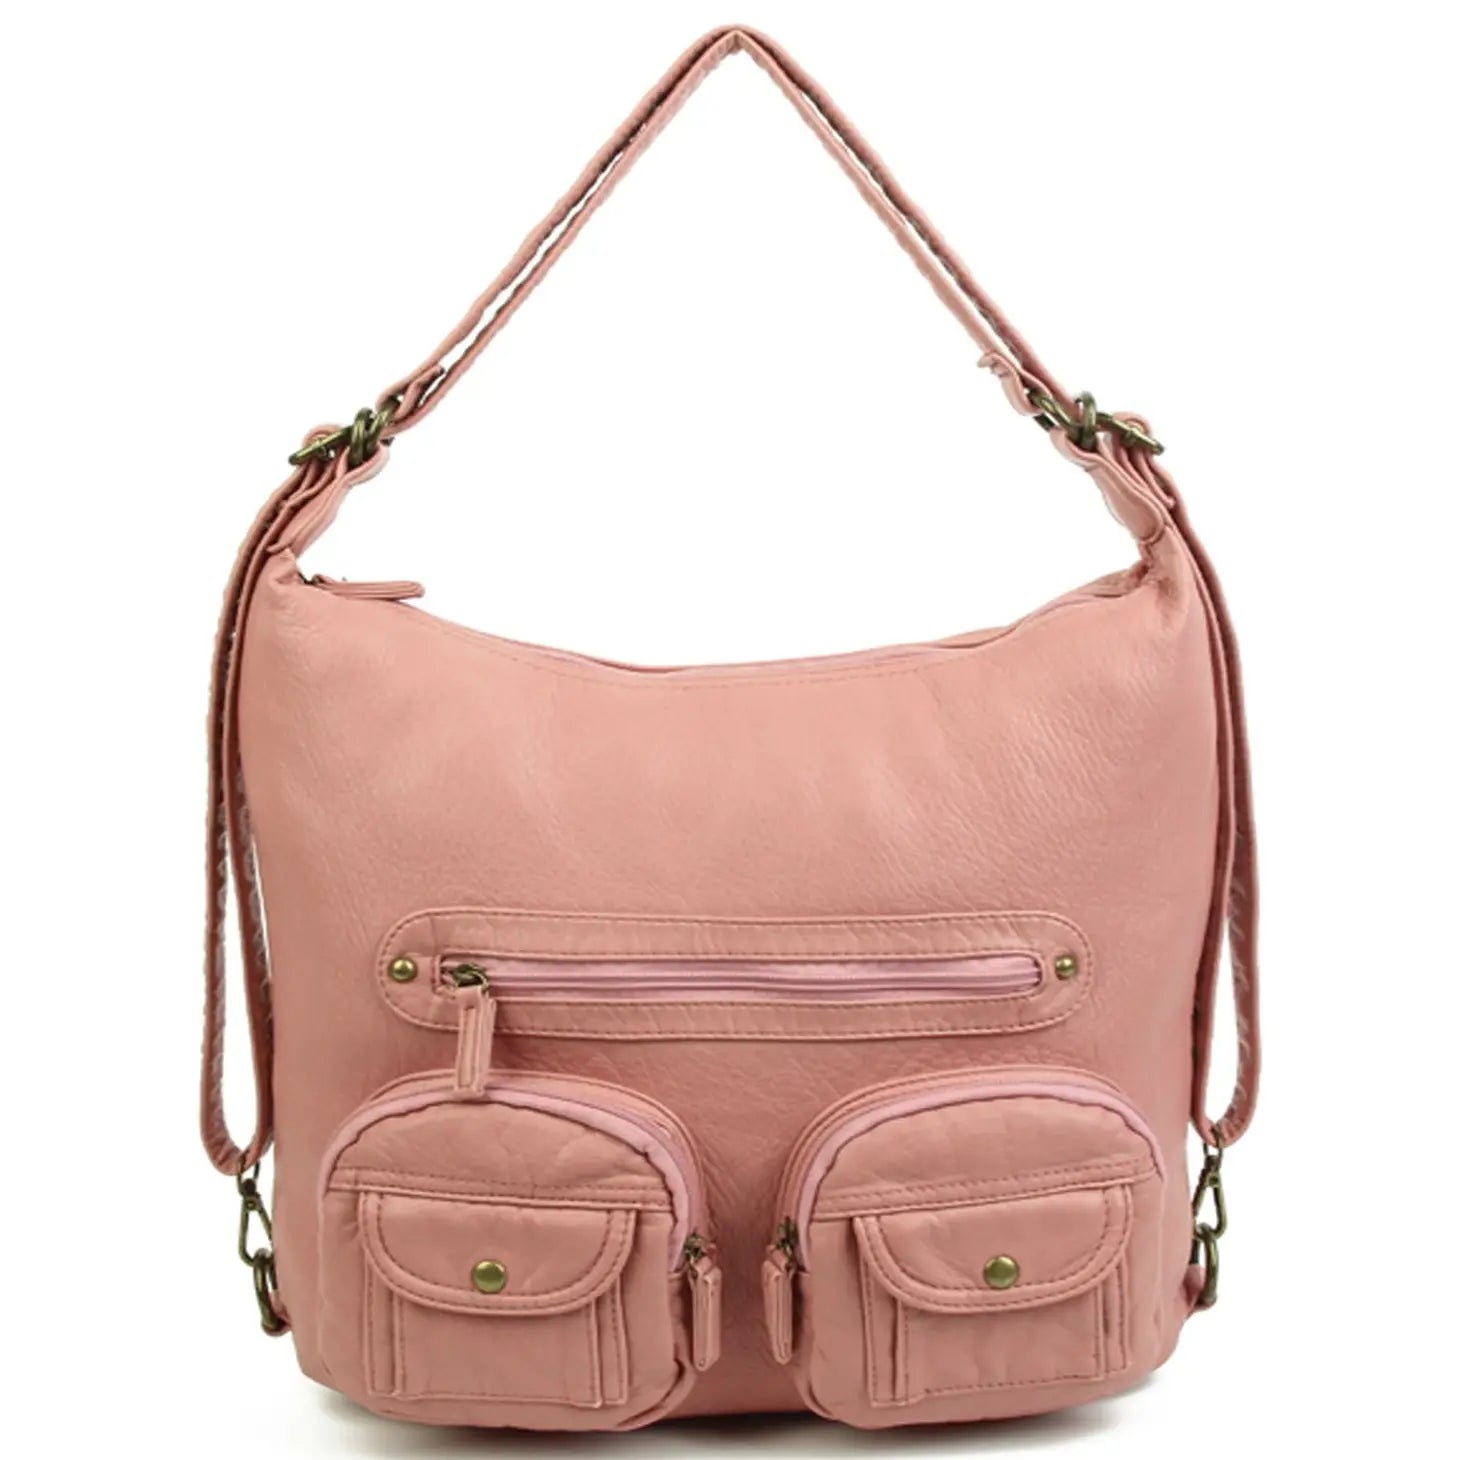 Andee Convertible Crossbody Backpack - Lavender Hills BeautyAmpere Creations